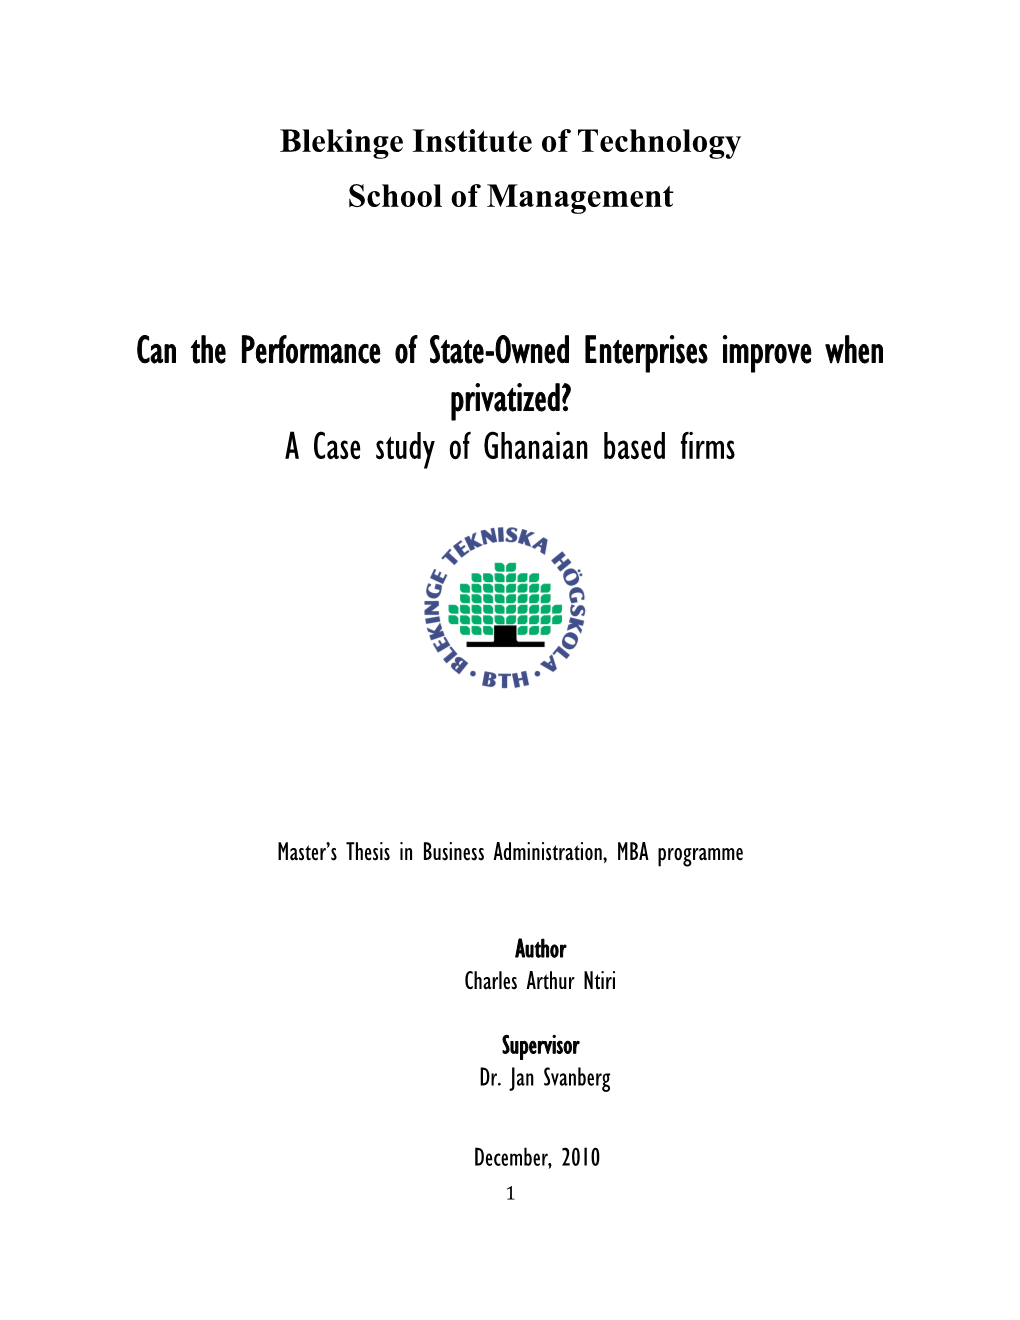 Can the Performance of State-Owned Enterprises Improve When Privatized? a Case Study of Ghanaian Based Firms